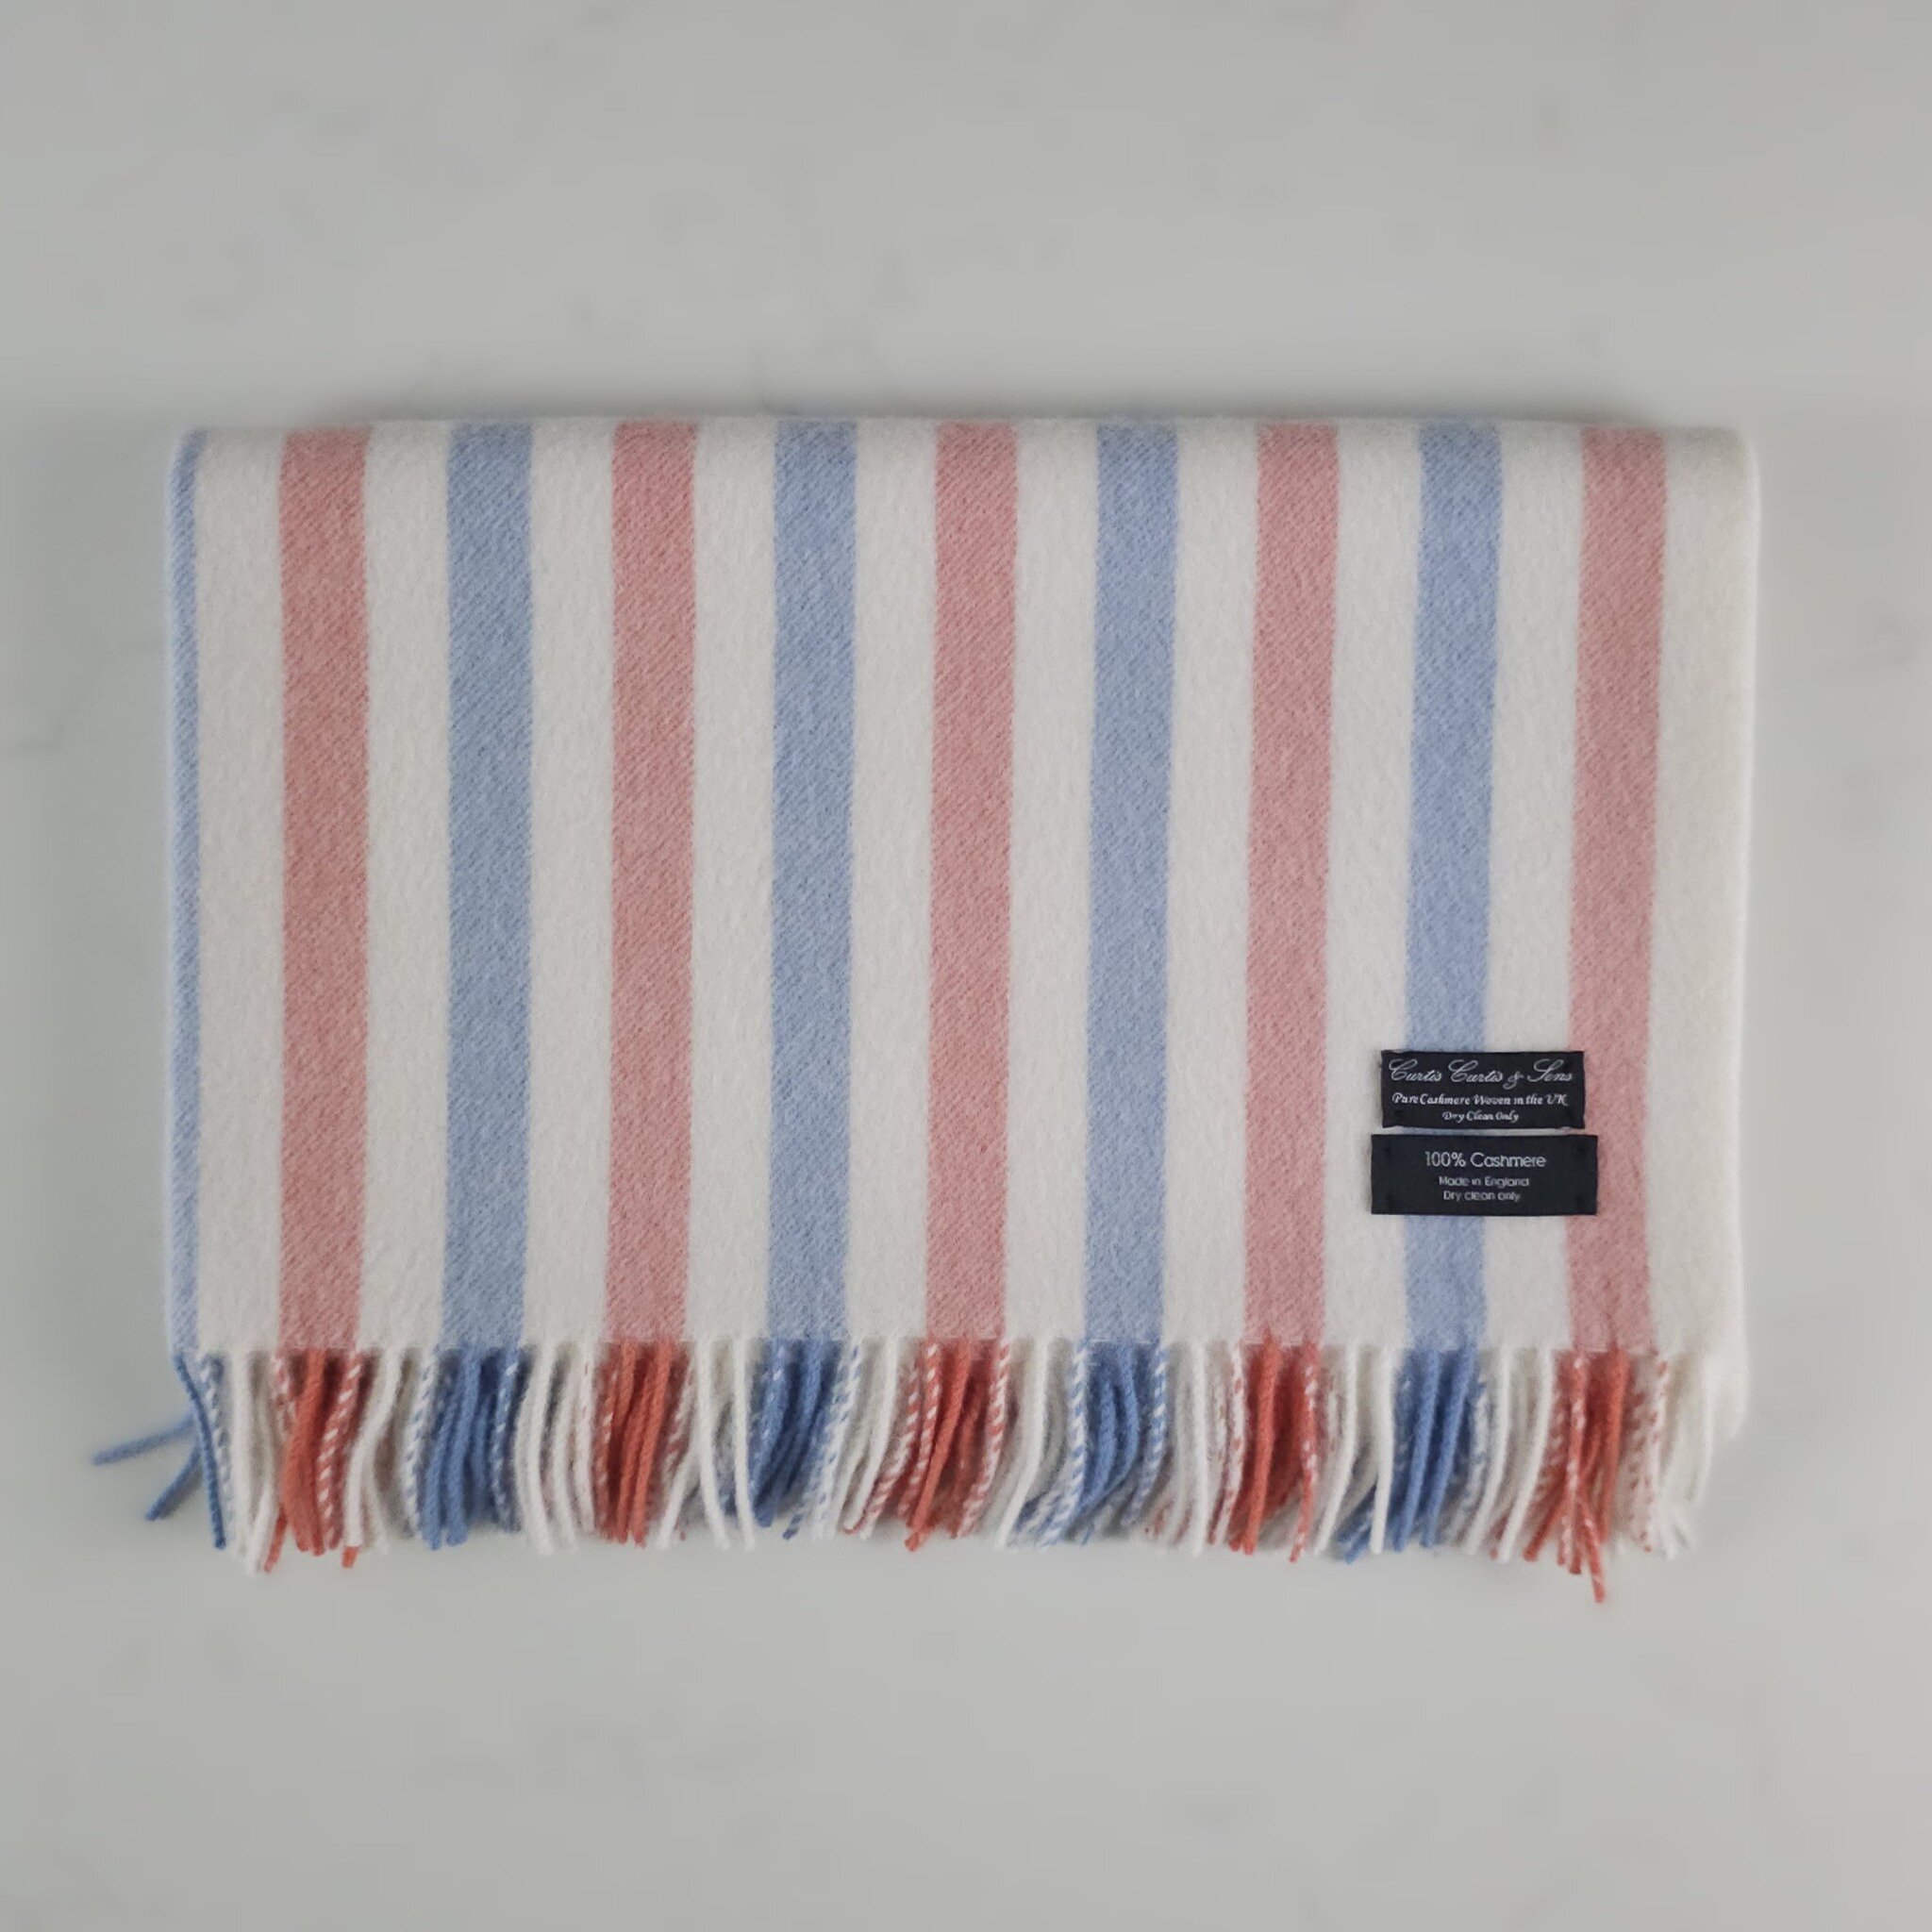 Candy - Pure Cashmere Baby Blanket... the very last one in stock from our best selling baby blanket range!

Woven in Yorkshire from the finest cashmere, with a seriously soft brushed finish that your precious little one will love to be wrapped up in.